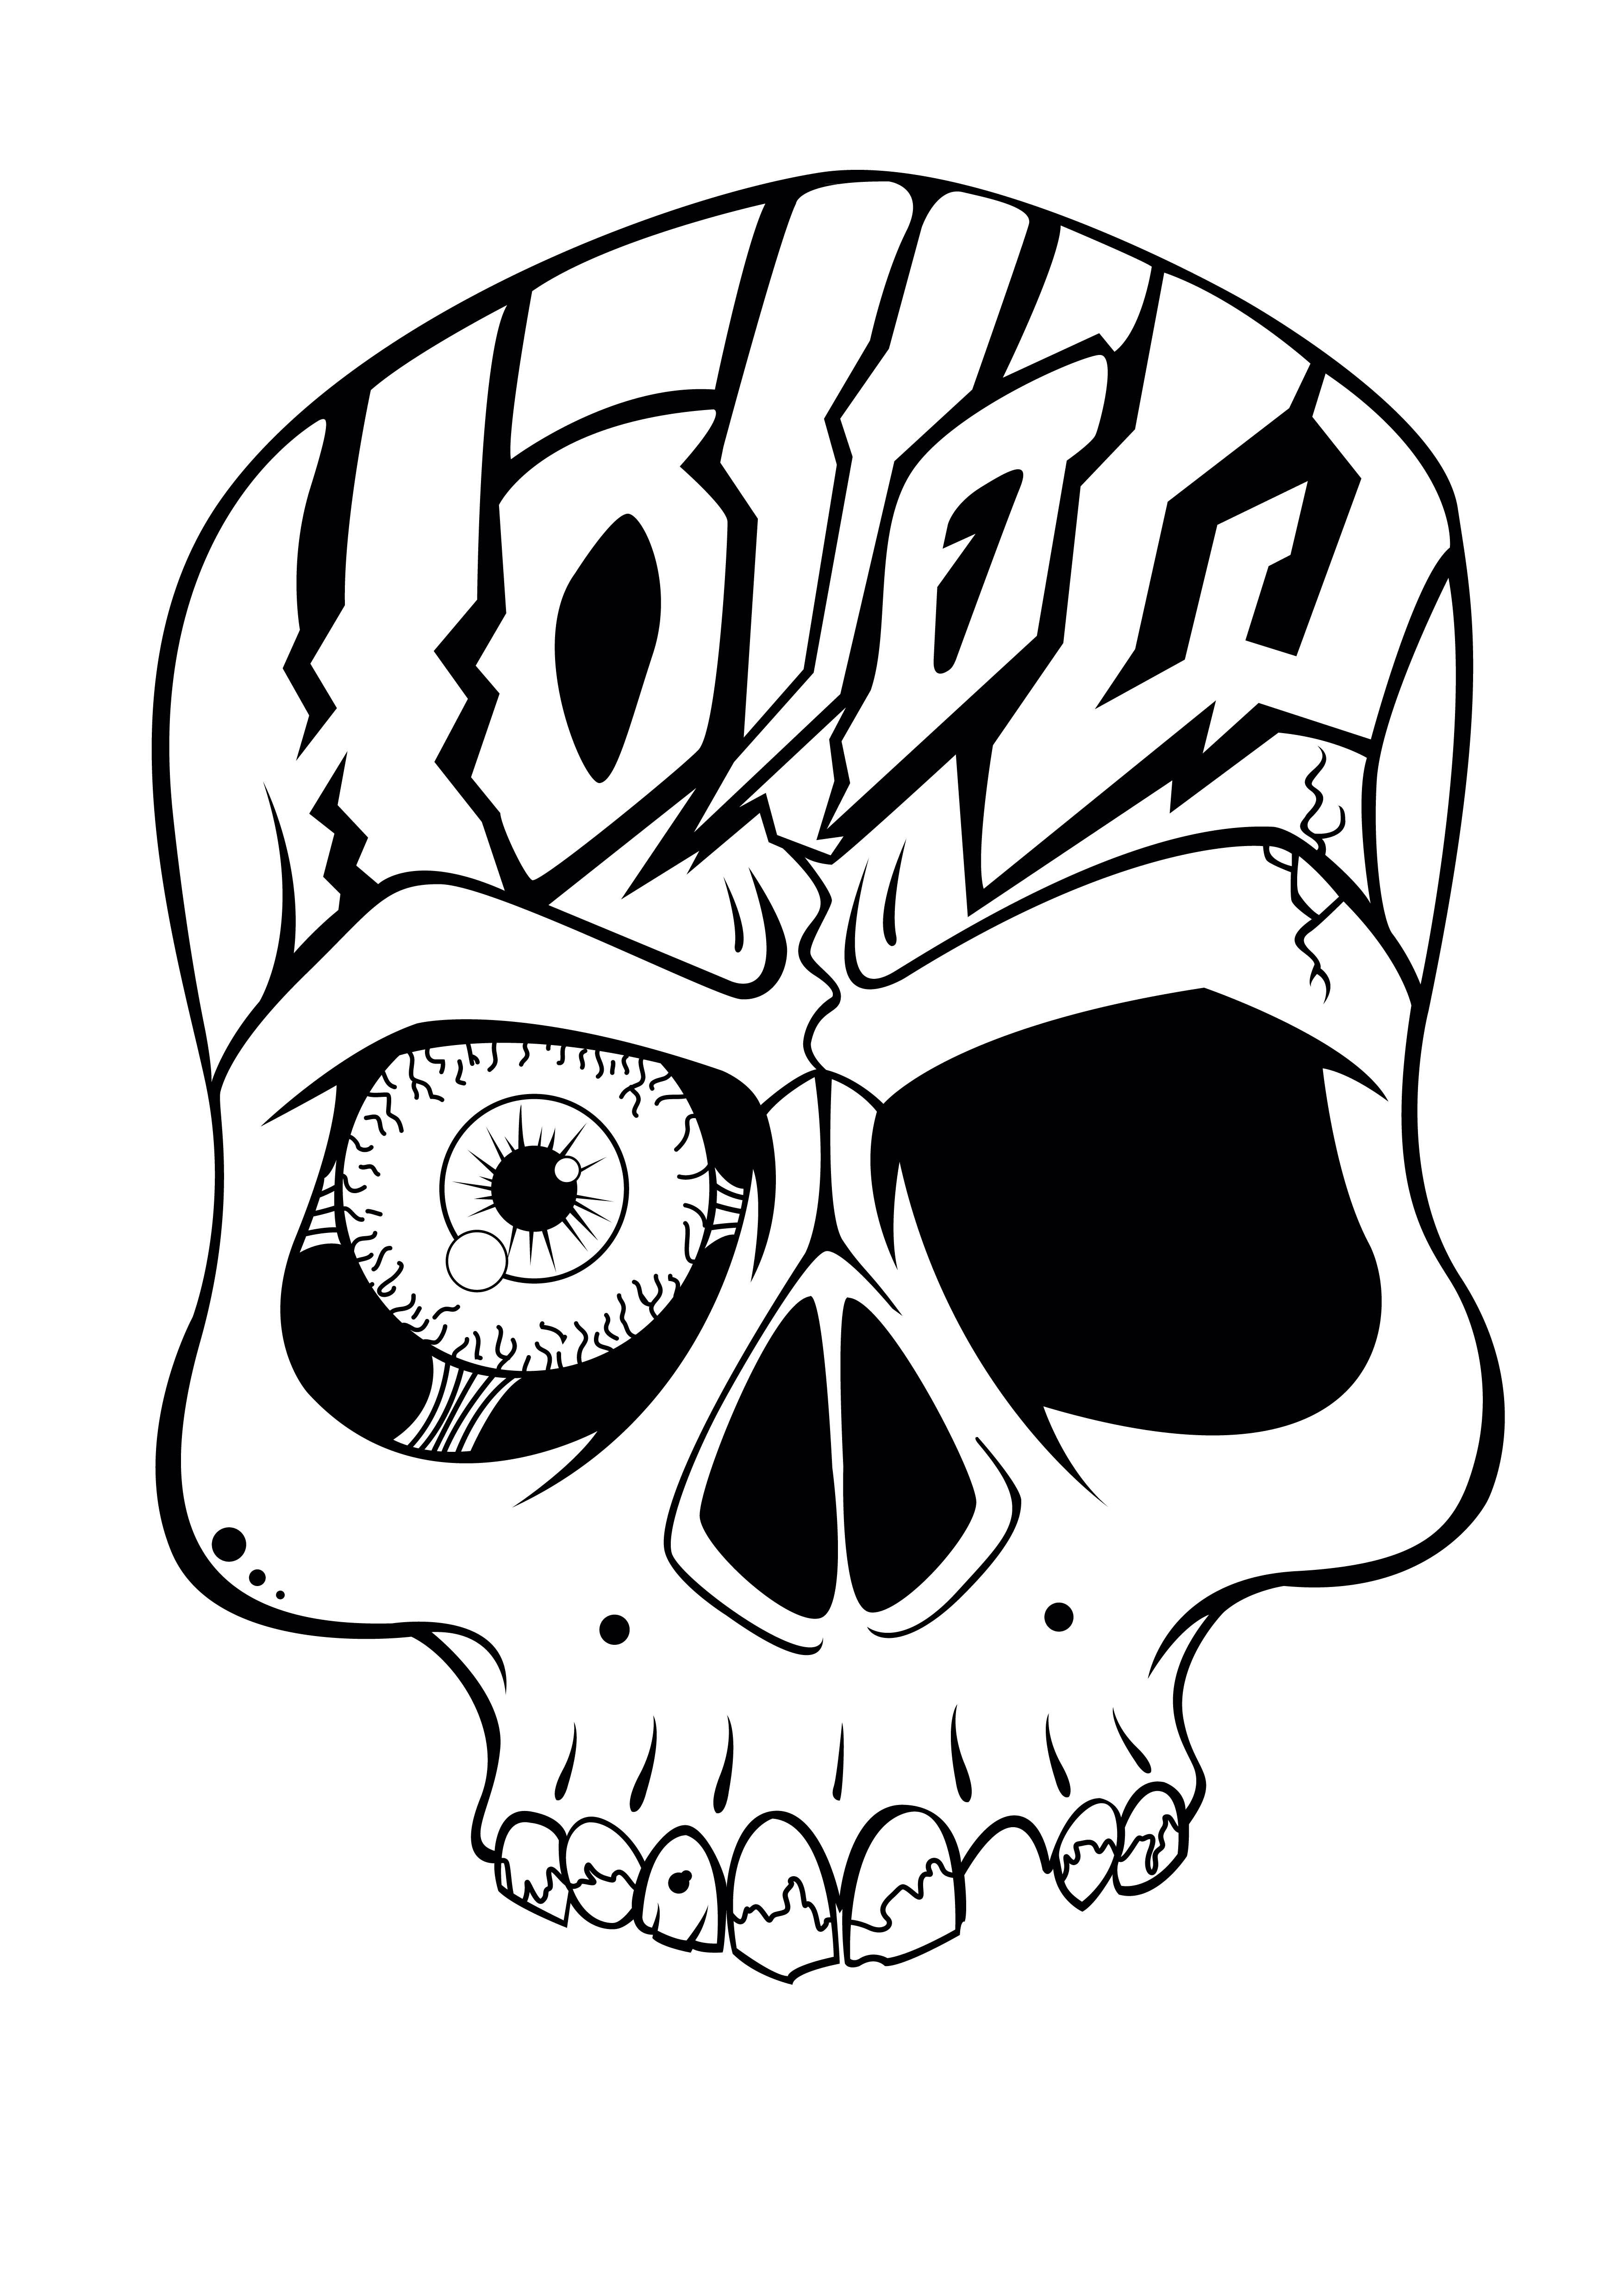 Pics Of Skull Drawings - ClipArt Best